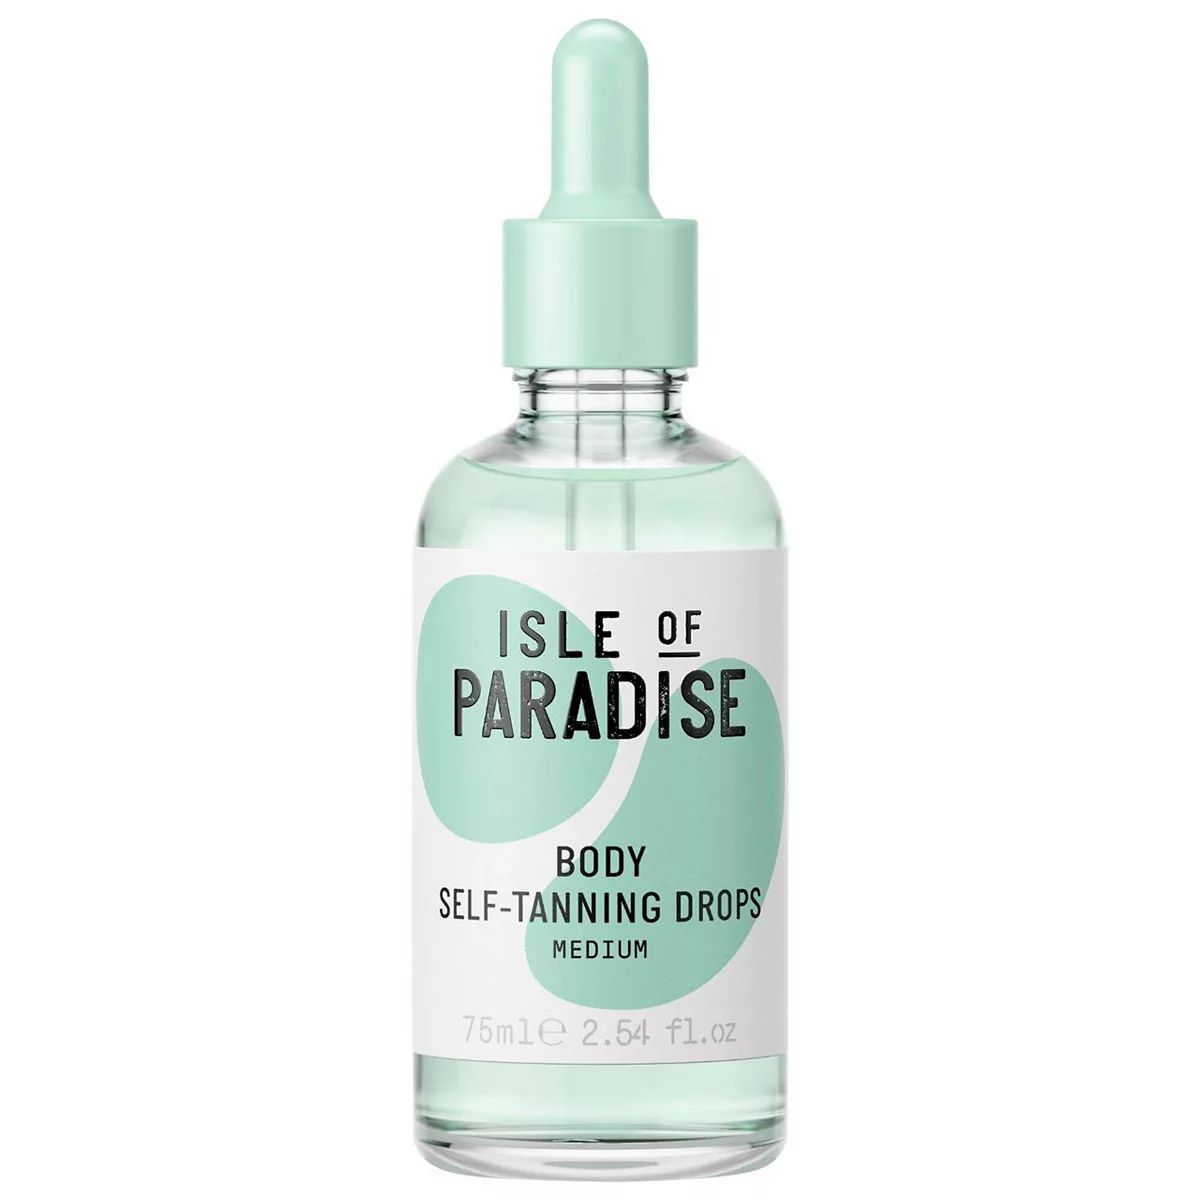 Isle of Paradise Self-Tanning Firming Body Drops | Kohl's